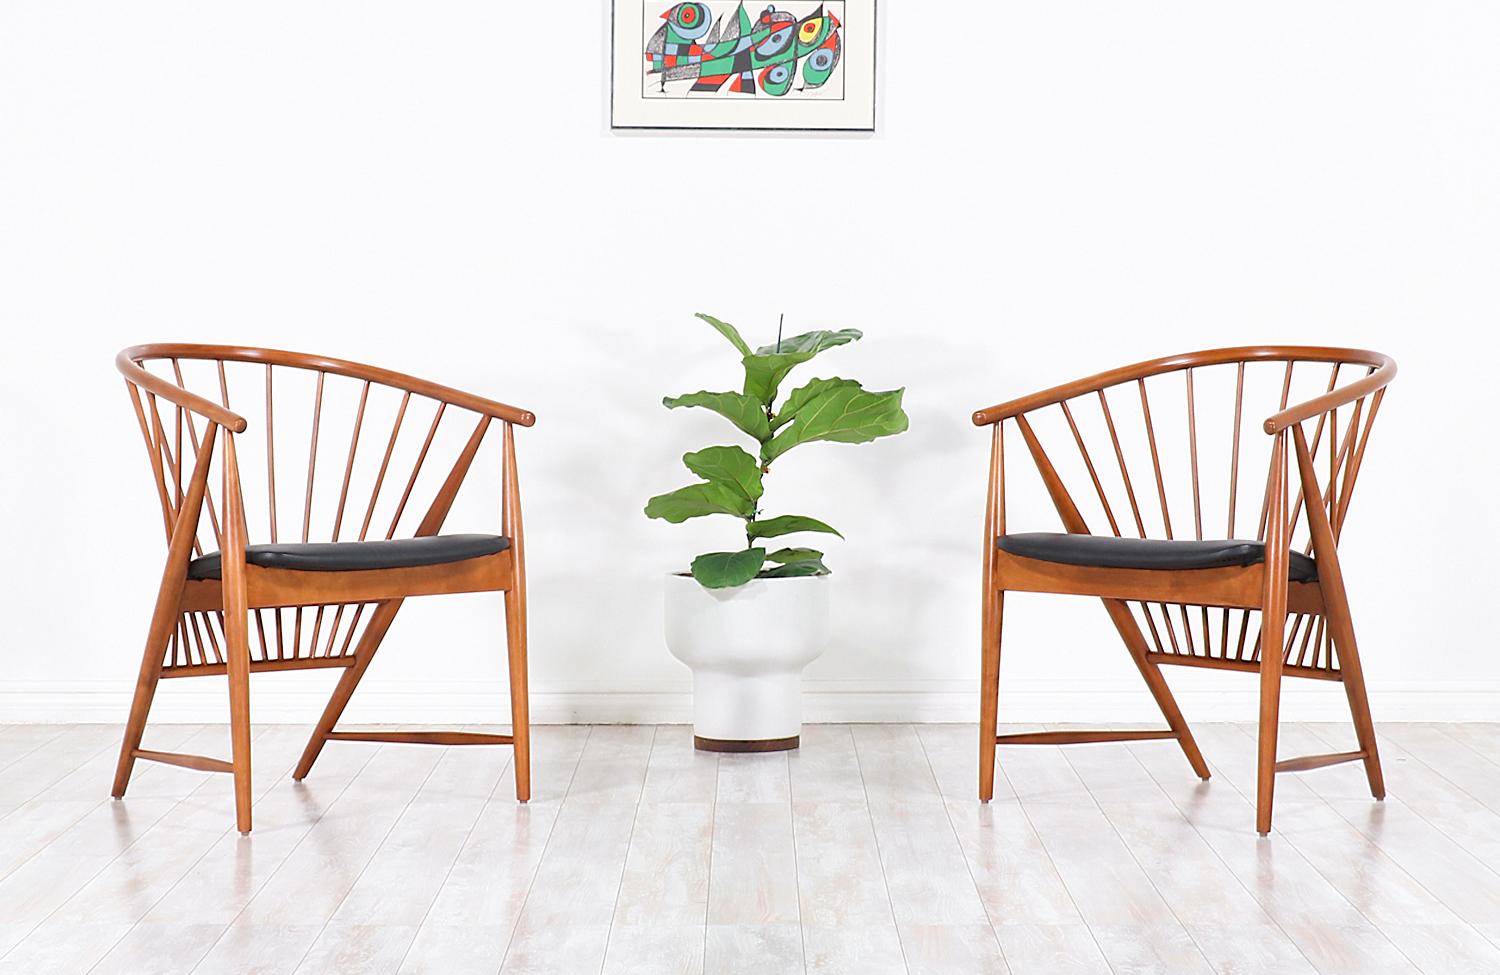 Iconic easy modern chairs designed by Sonna Rosén for Nässjö Stolfabrik in Sweden in 1948. This early example of the “Sun Feather” spindle chairs was inspired by the Shaker design movement showcasing remarkable craftsmanship throughout the chair